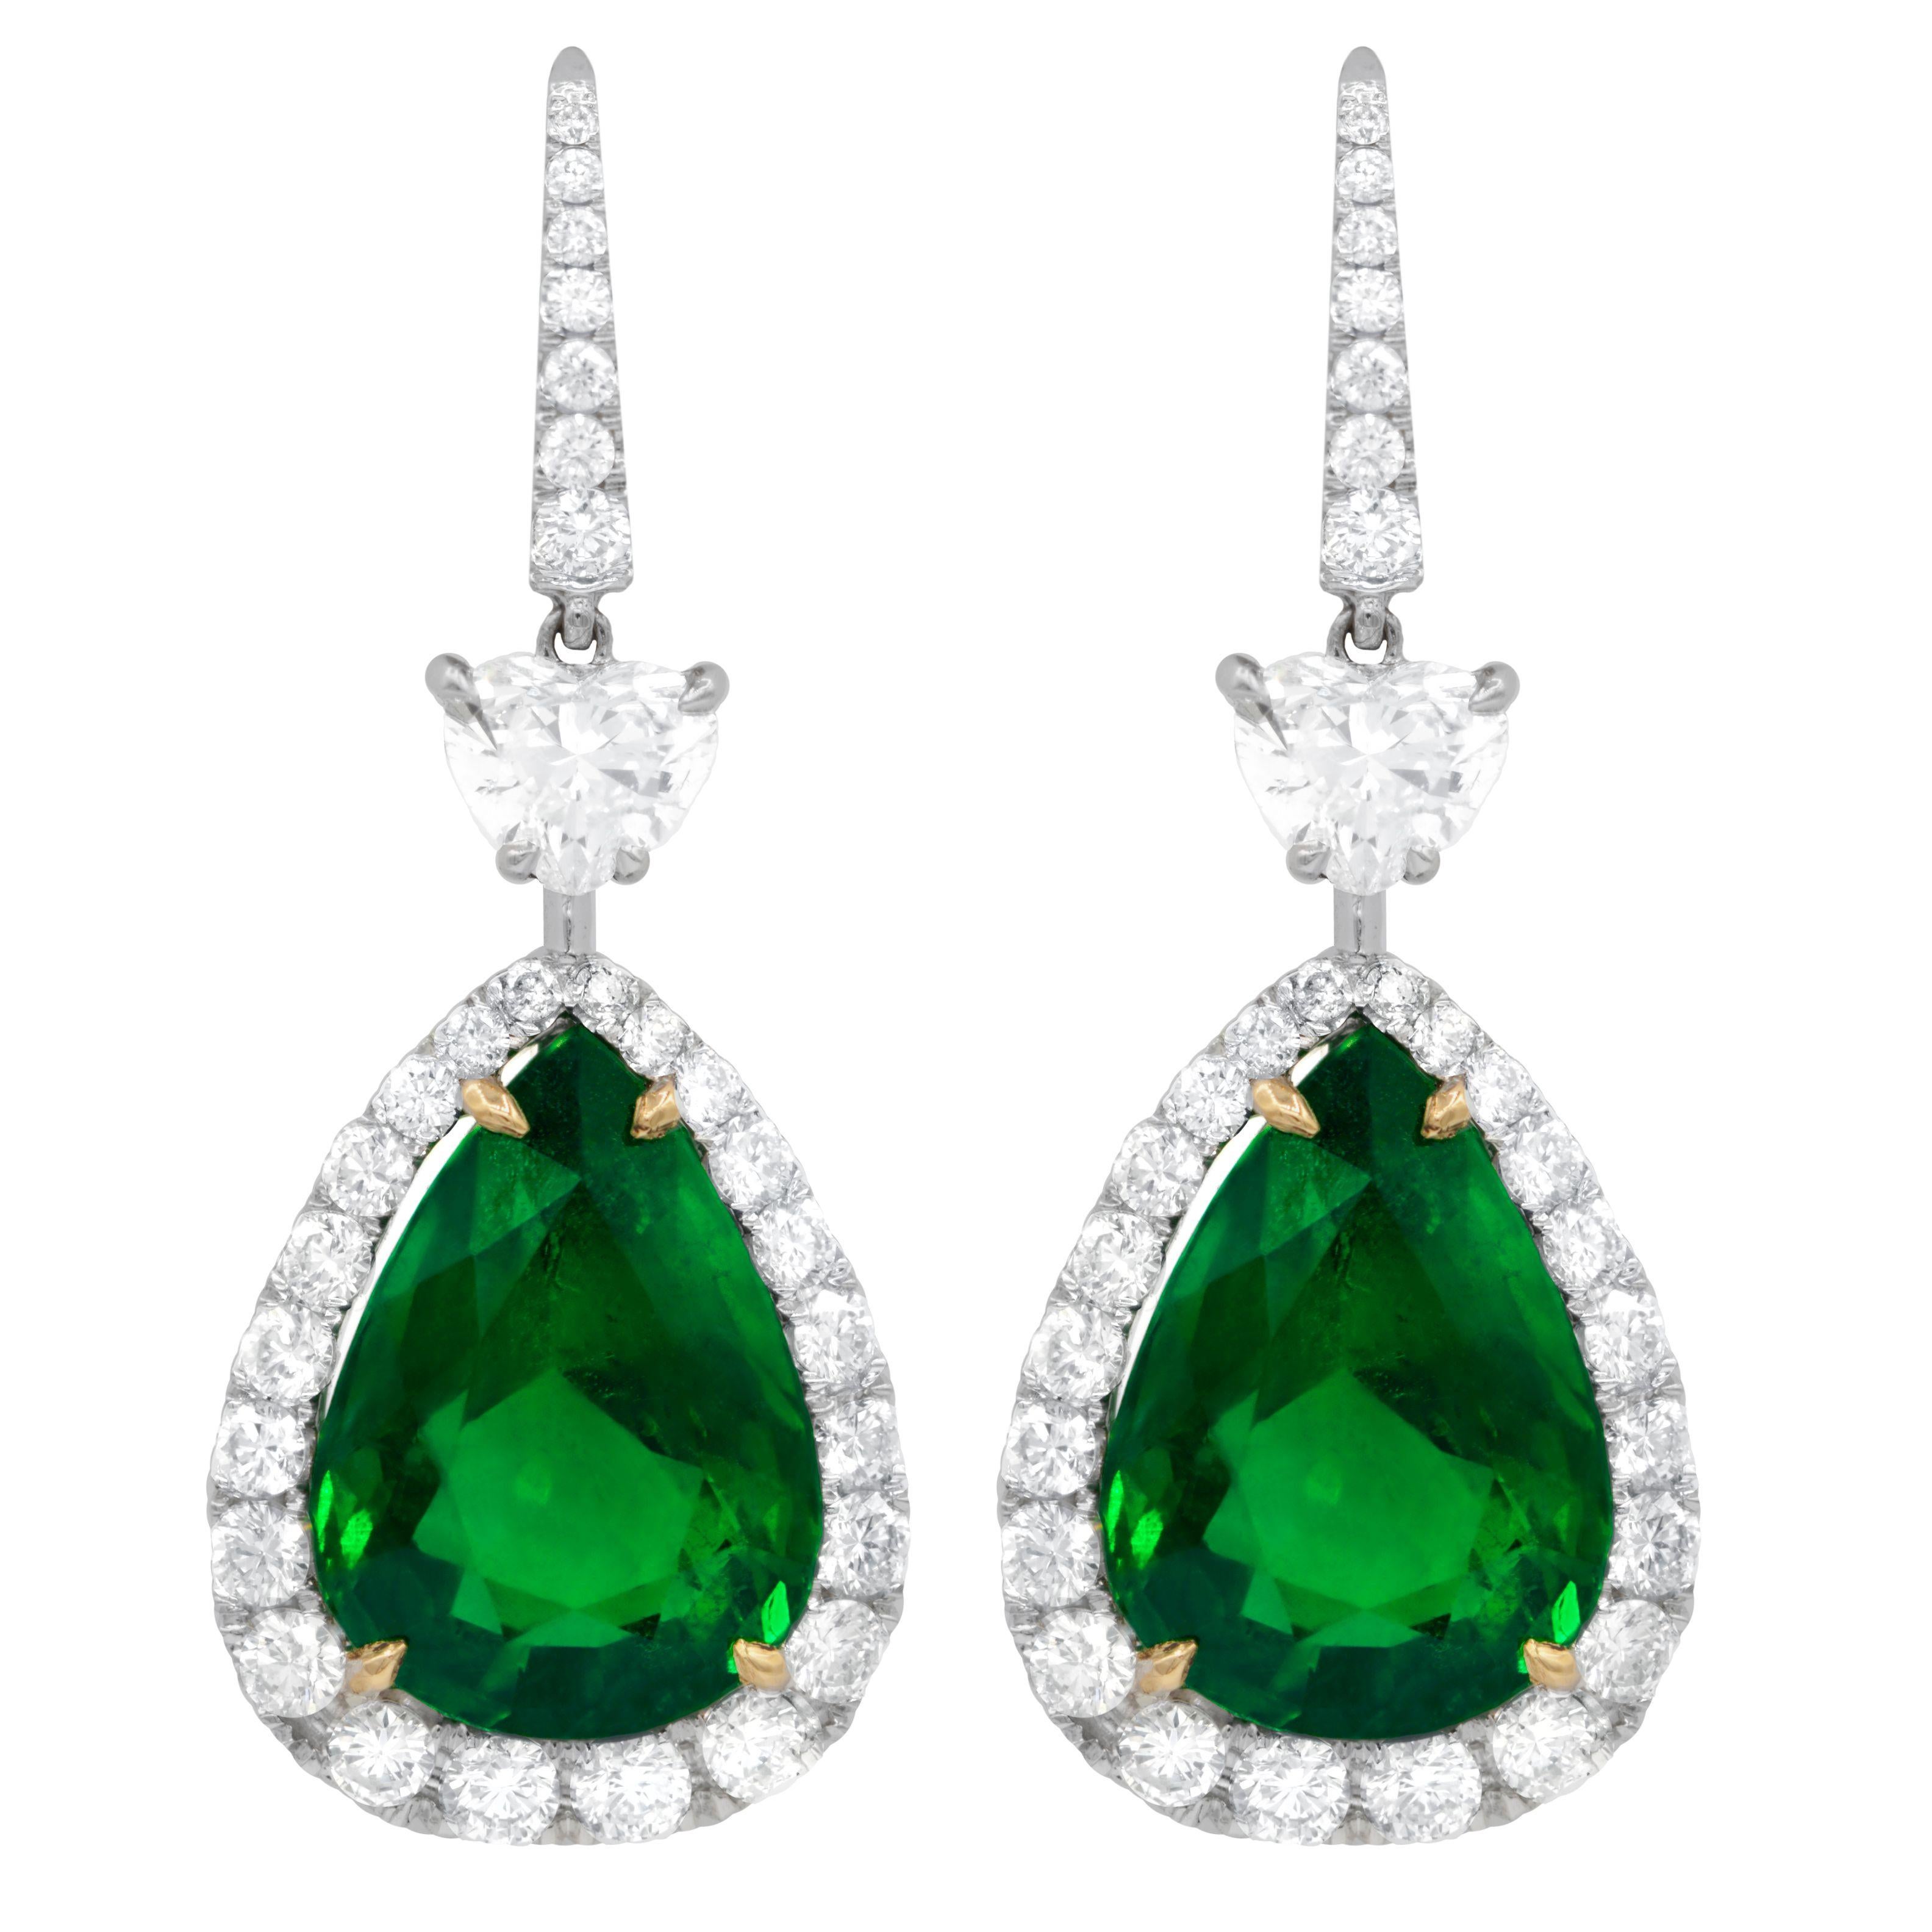 Beautiful pair of Pear Shaped Green Emerald Drop Earrings, with 15.34 Carats of total Gemstone Weight and Two GIA Certified Hear Shaped Diamonds in 1.41 Carats of Diamond Weight accompanied by Round diamonds of different weight in Total of 2.35